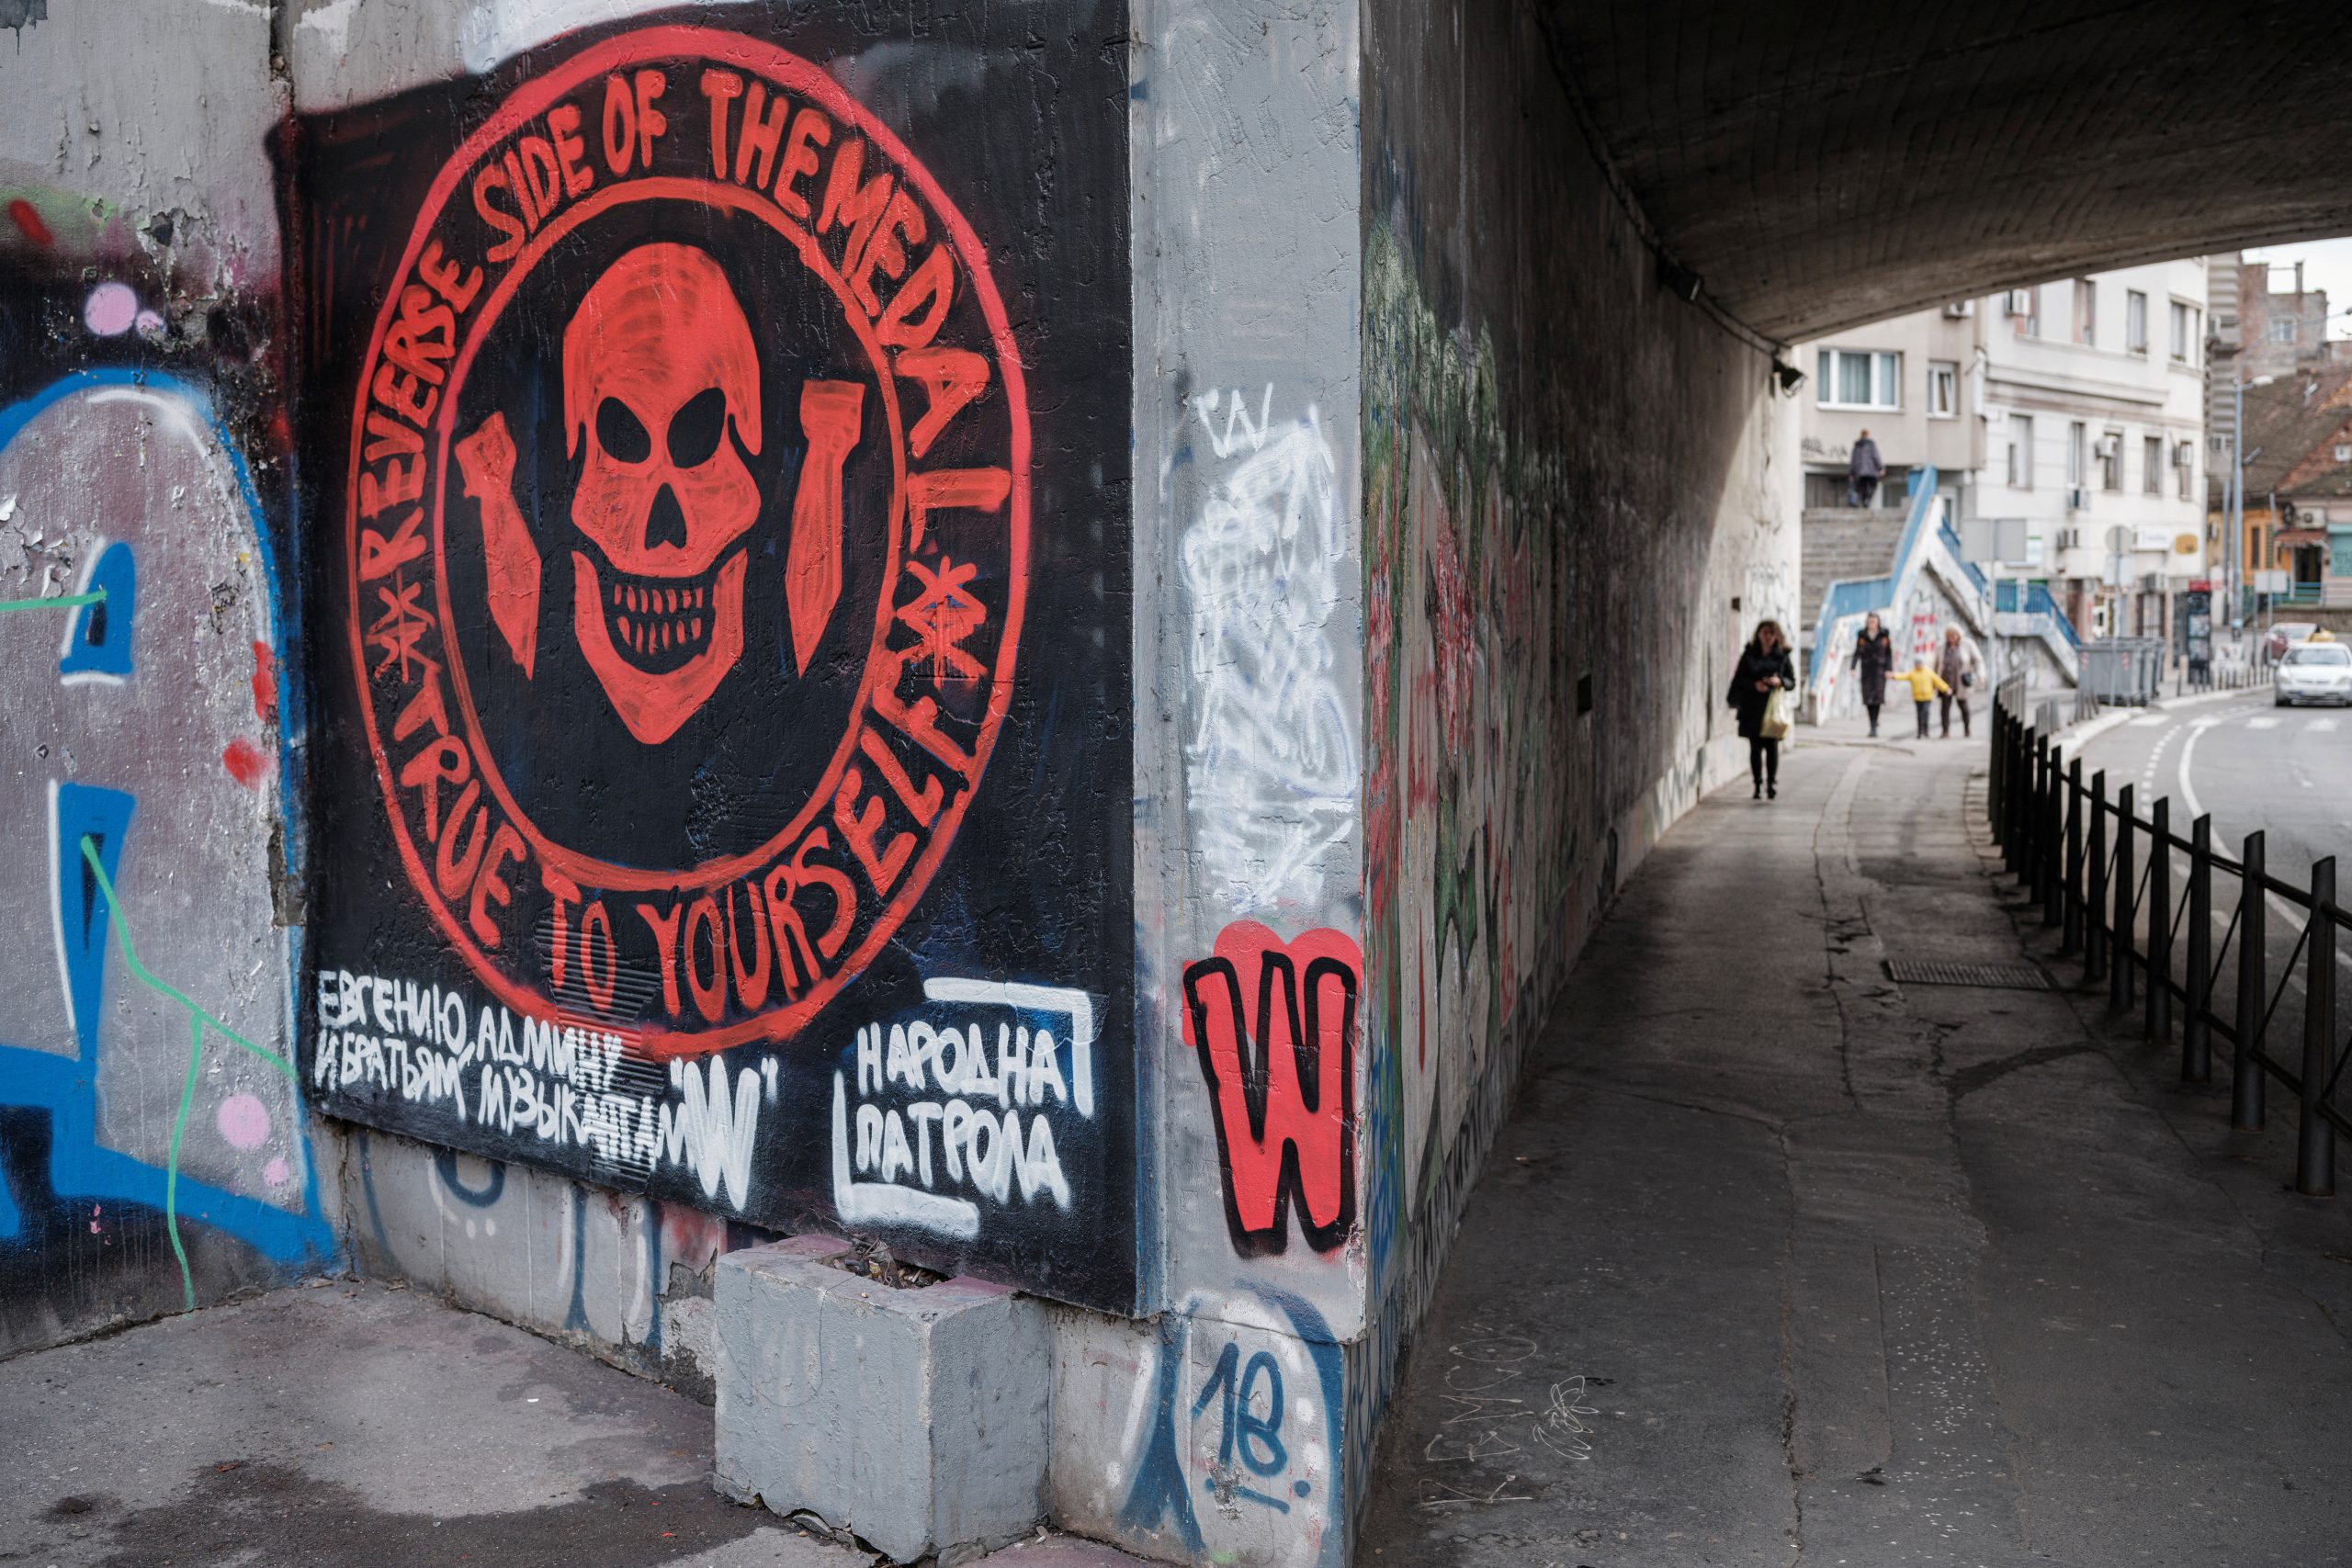 Photo: A mural depicting Wagner private military group is seen on a wall in Belgrade, Serbia, January 18, 2023. Credit: REUTERS/Marko Djurica